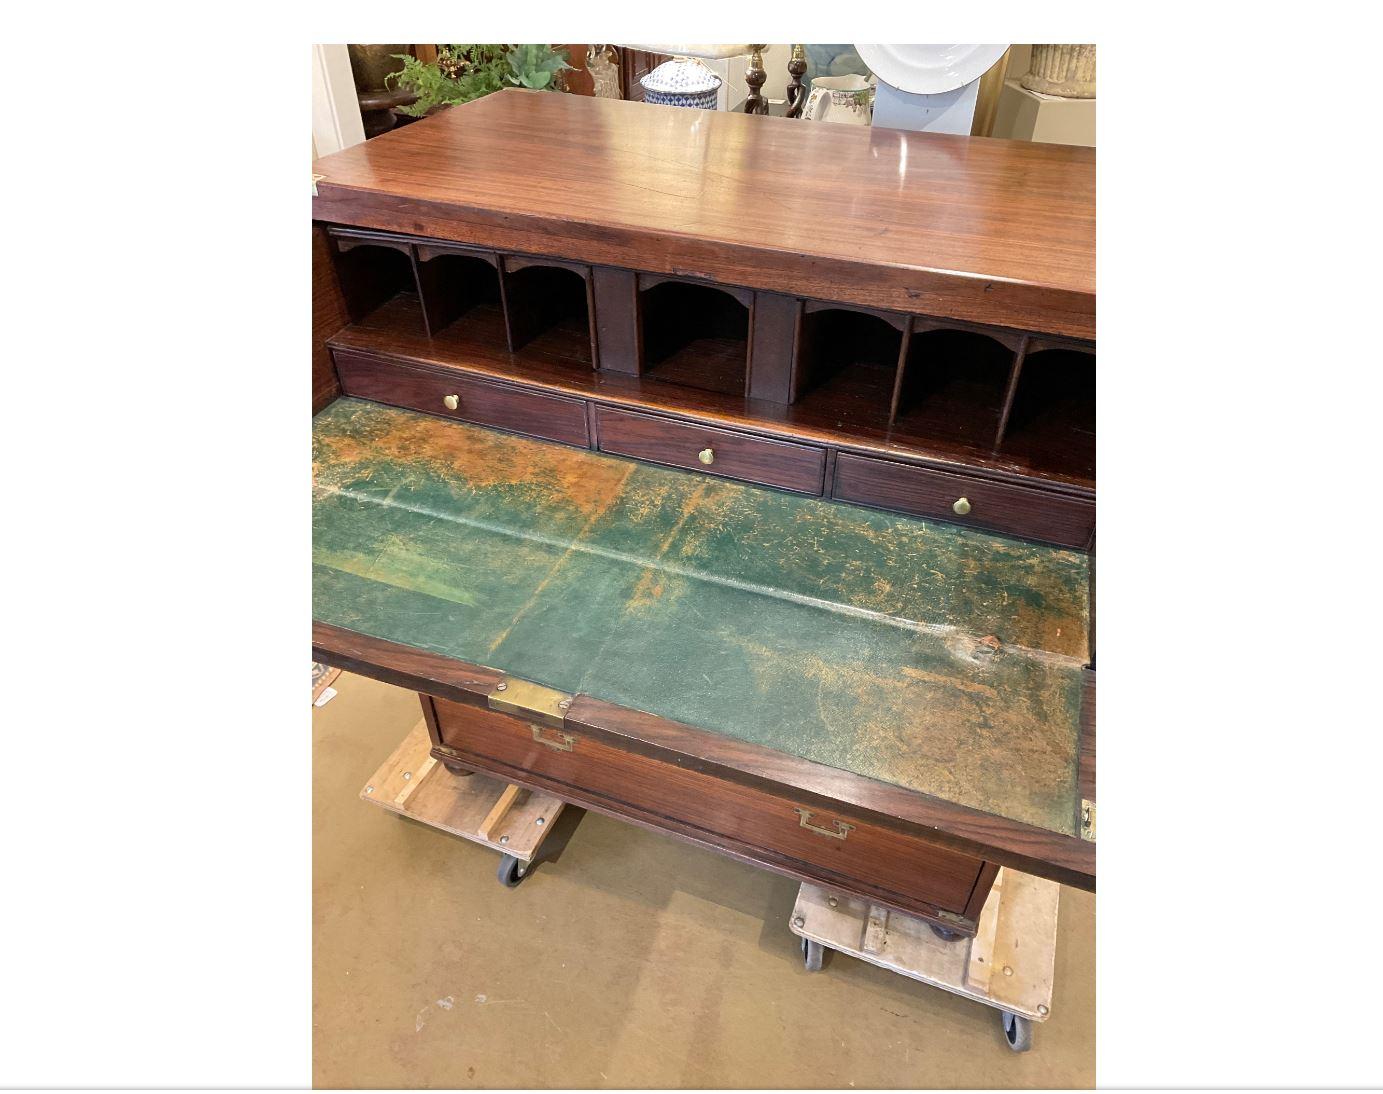 This 19th century campaign chest would make a perfect addition to a bedroom, office, or even living room! This chest is larger than many and has lovely patina The classic campaign style brass handles give this piece a unique look different from